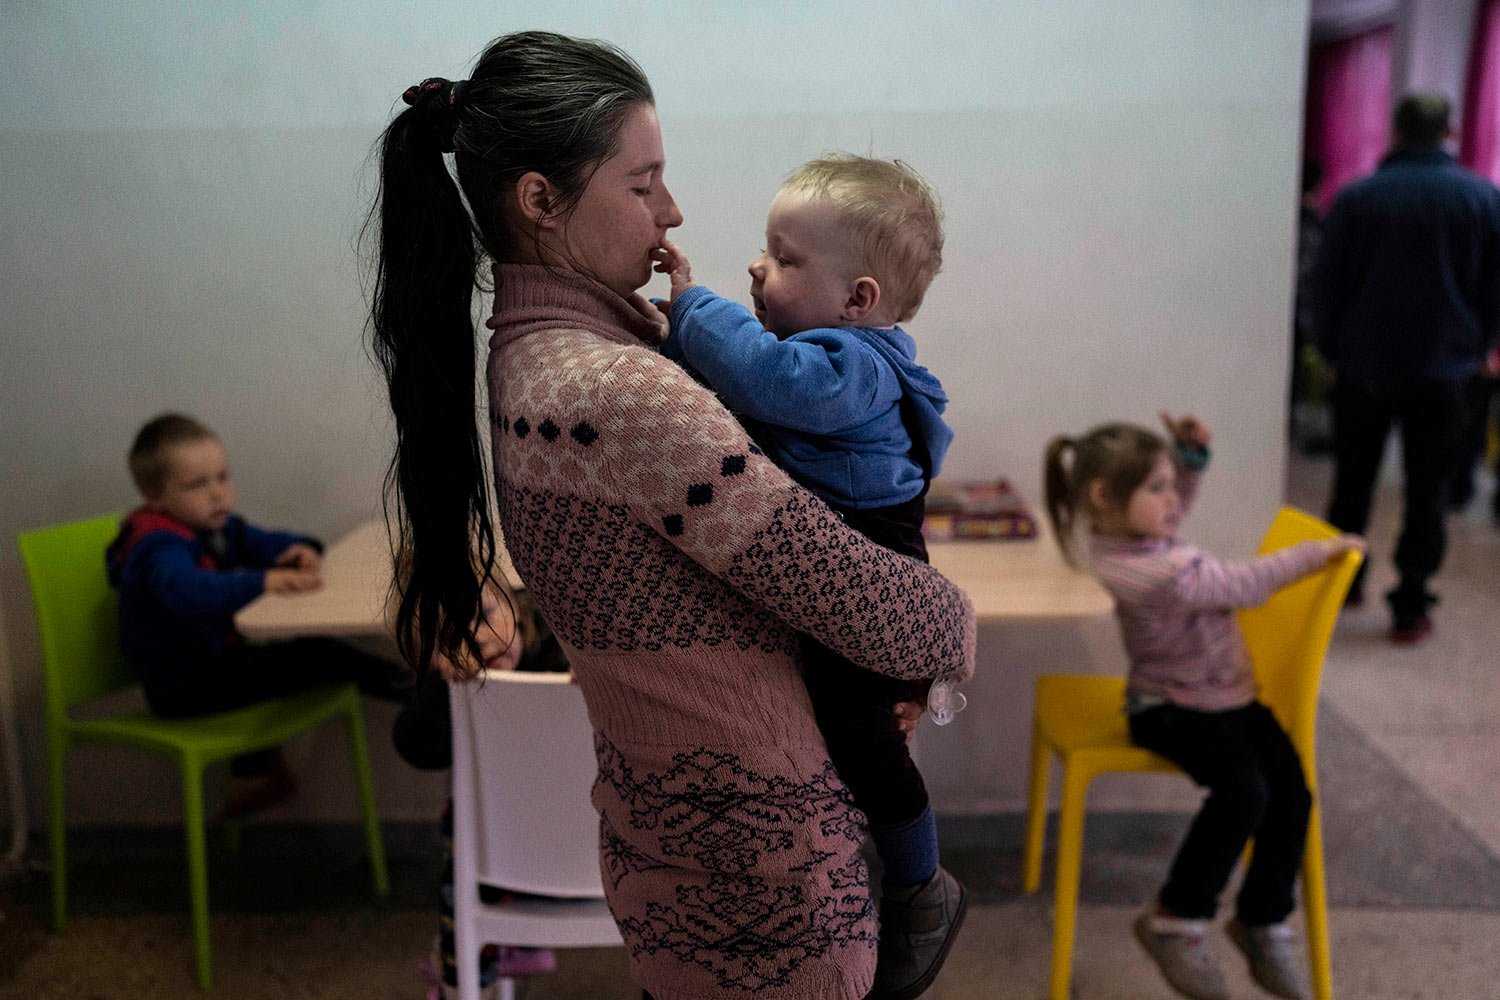  Marta Fedorova holds her baby boy as her son Volodymir 6, and her daughter Violetta 5, right, sit inside a school that is being used as a shelter for people who fled the war, in Dnipro city, Ukraine, on Tuesday, April 12, 2022. Marta Fedorova with h